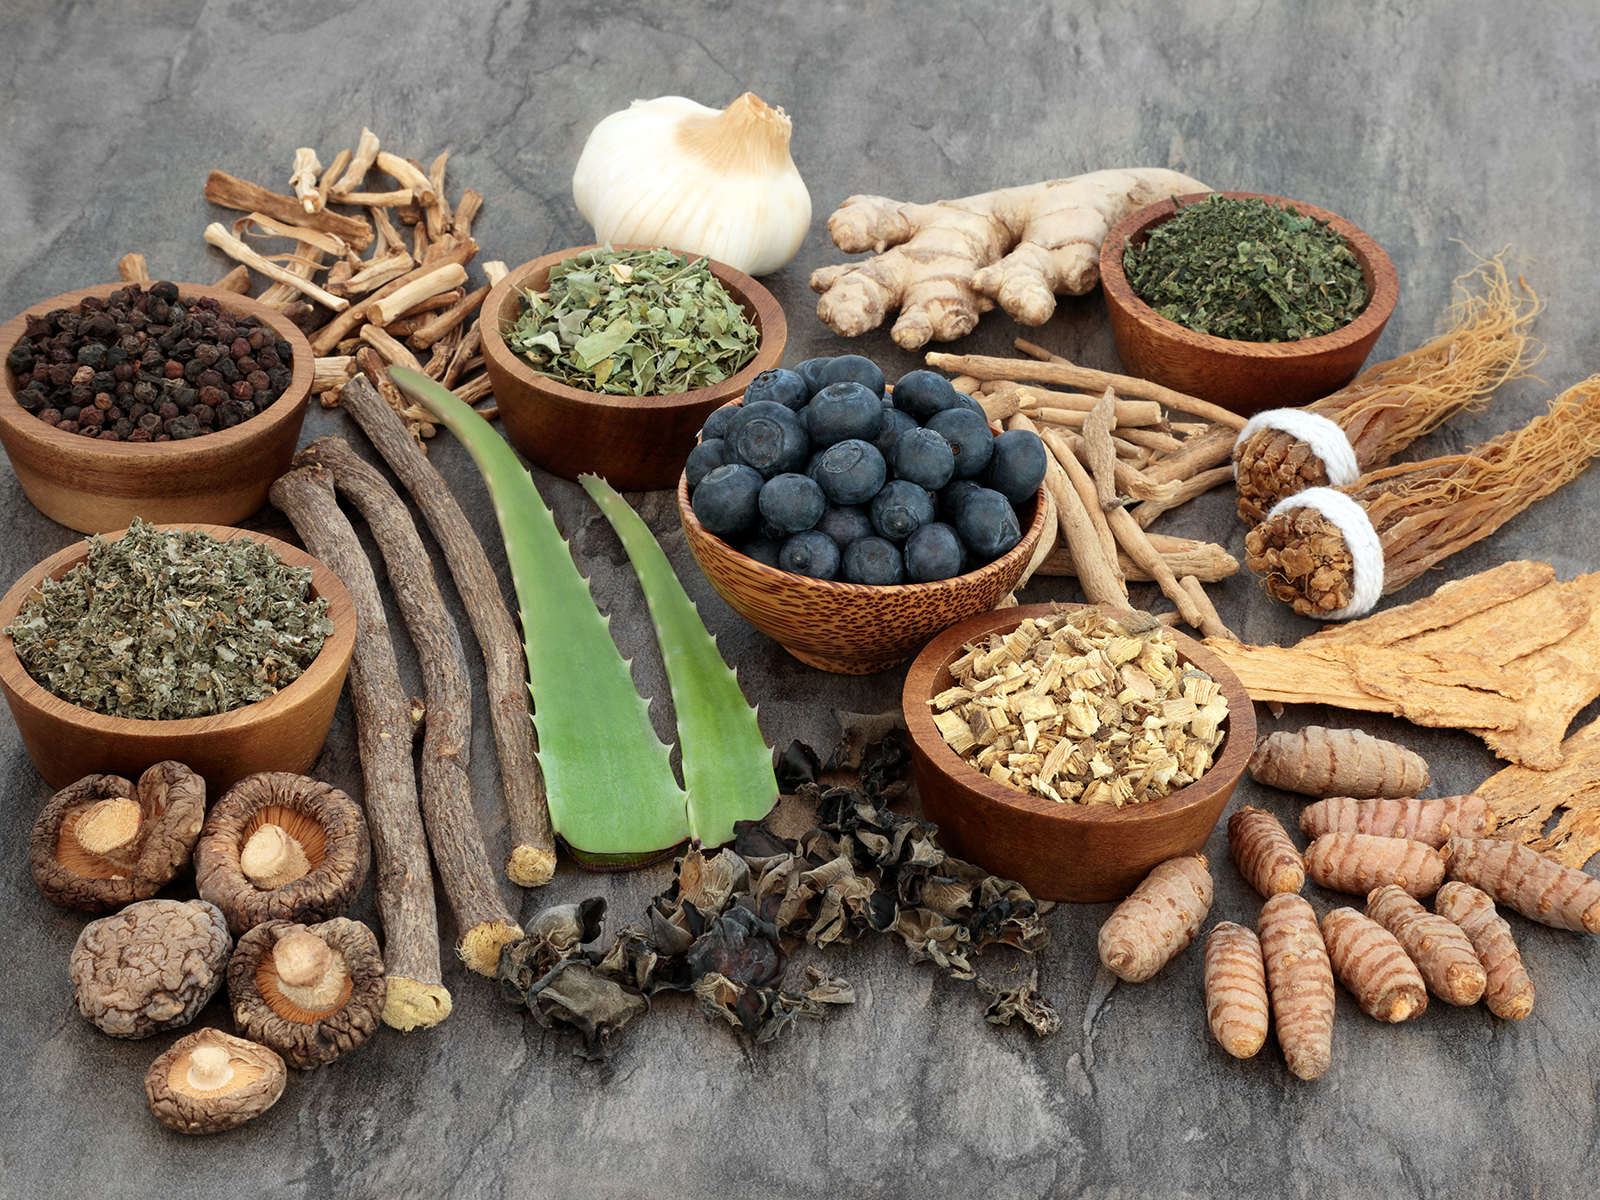 "Adaptogens for Stress Relief": A look into herbal supplements that help the body resist stressors.